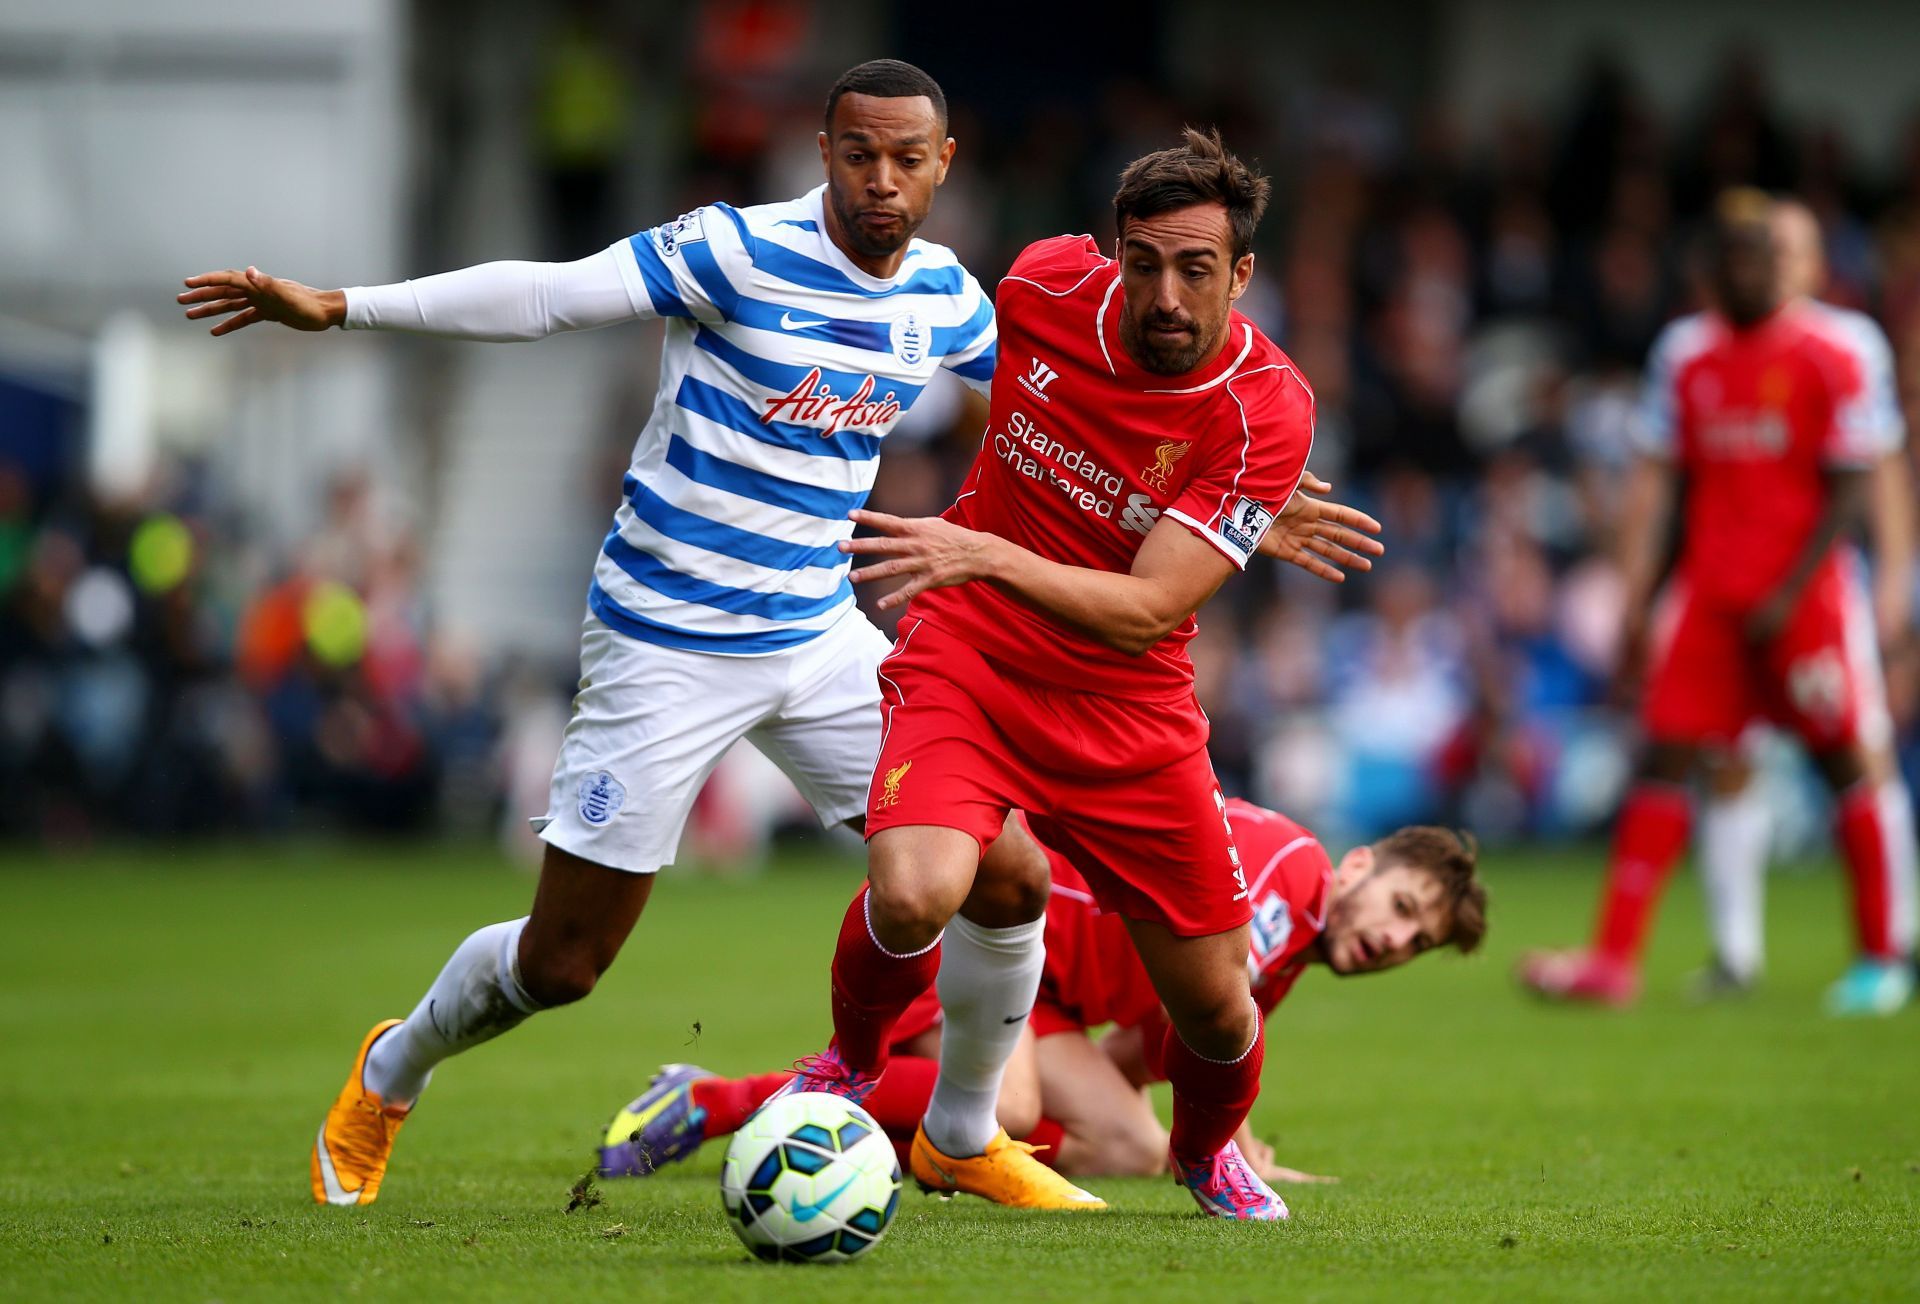 Jose Enrique has urged his former club to sign Jude Bellingham